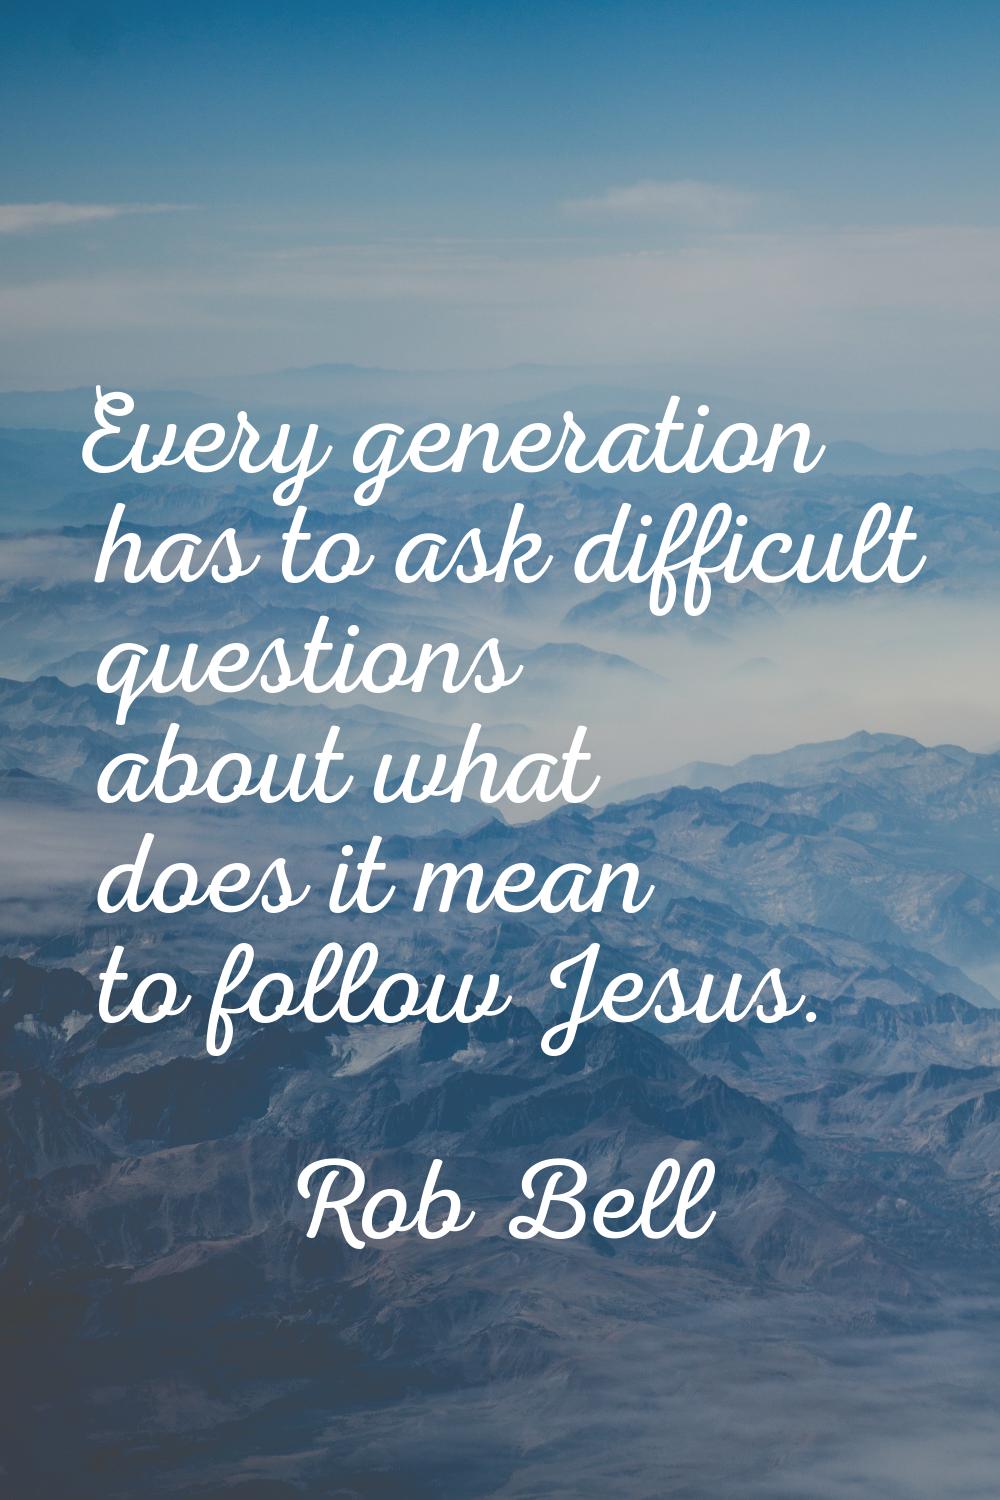 Every generation has to ask difficult questions about what does it mean to follow Jesus.